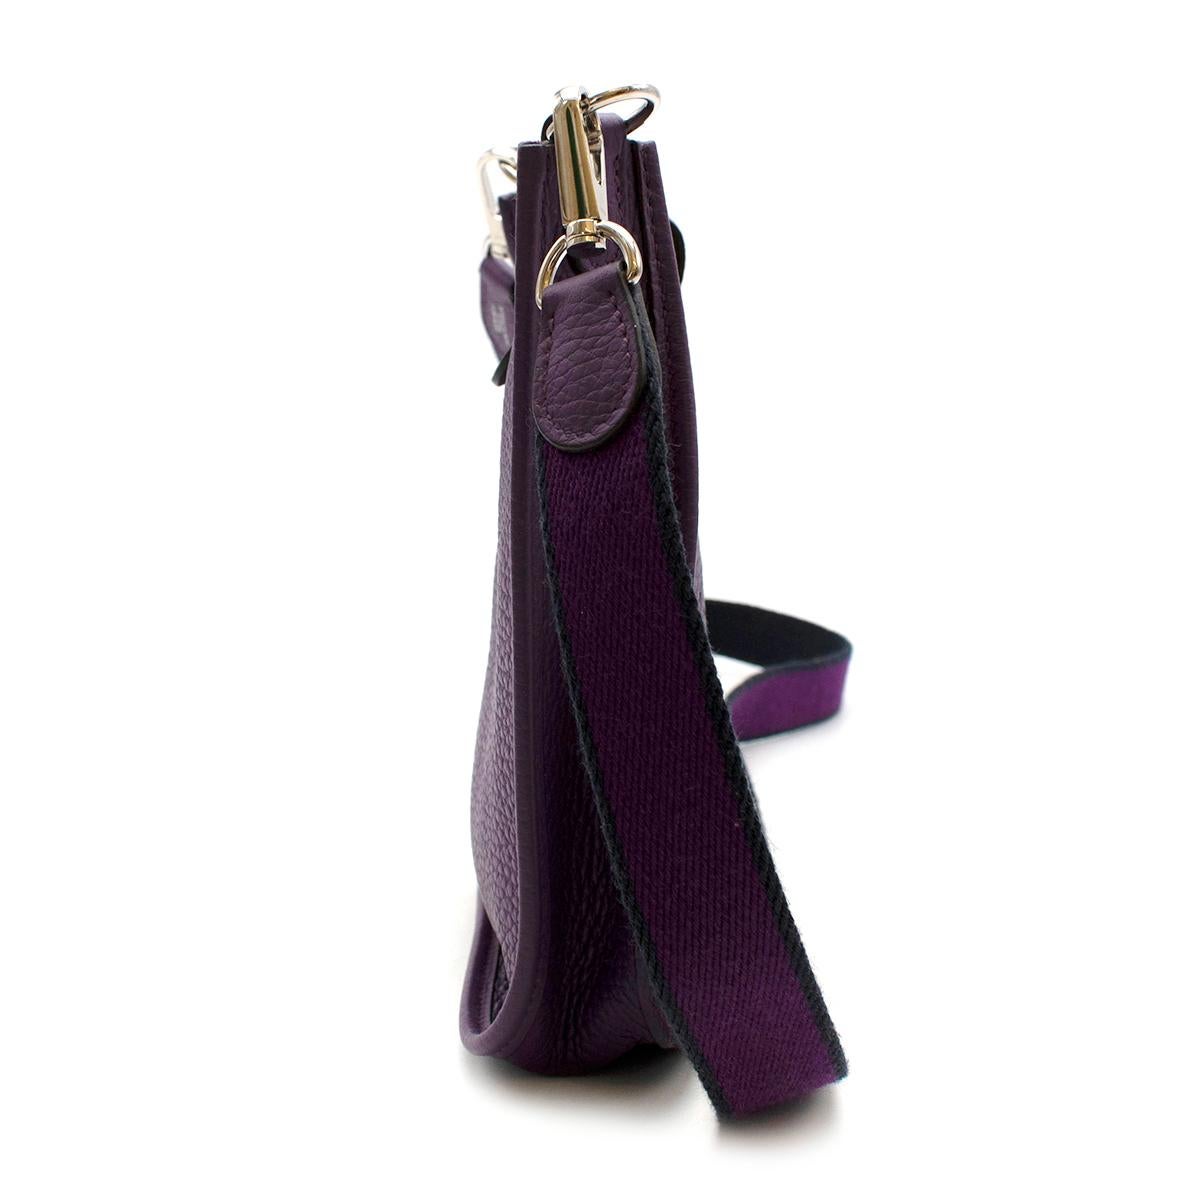 Hermes Ultraviolet Taurillon Clemence Leather Mini Evelyne Bag PHW

Since 1978, this bag has enchanted daily riders. First intended to tend horses, it is sewn without a lining and brightened up with an H perforation, which the initiates wear against